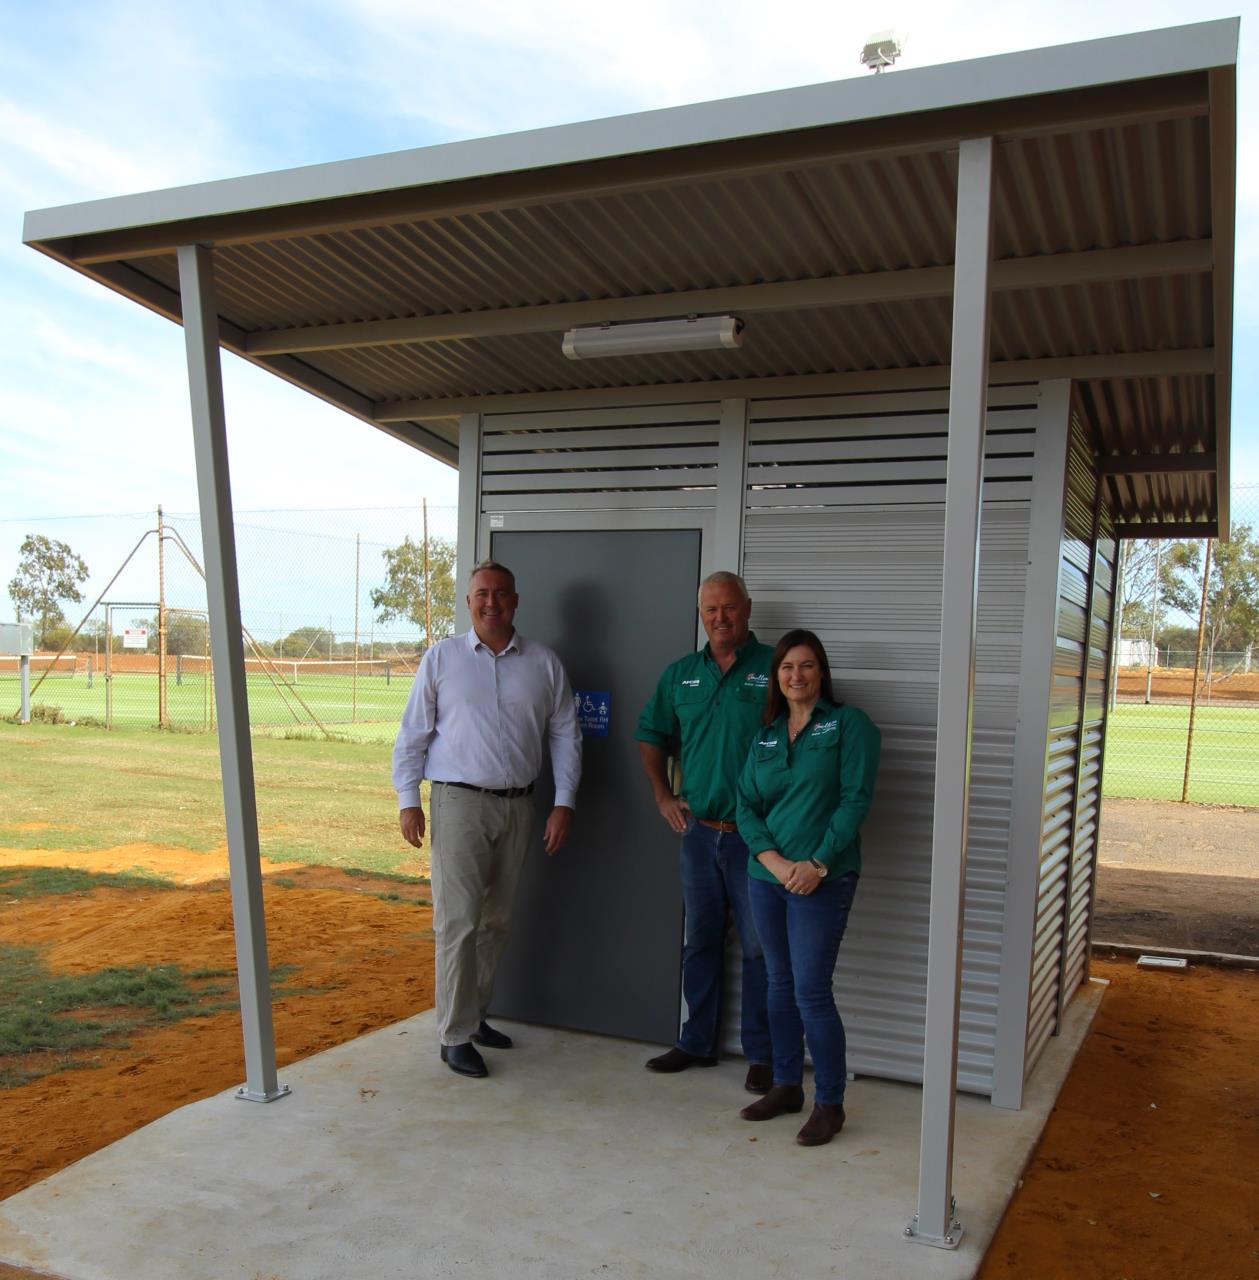 City of Greater Geraldton Mayor Shane Van Styn (left) and the Mullewa District Agricultural Society’s President Peter Barnetson and Secretary Julie Freeman in front of the new universal access toilet installed at the Mullewa Recreation Centre.